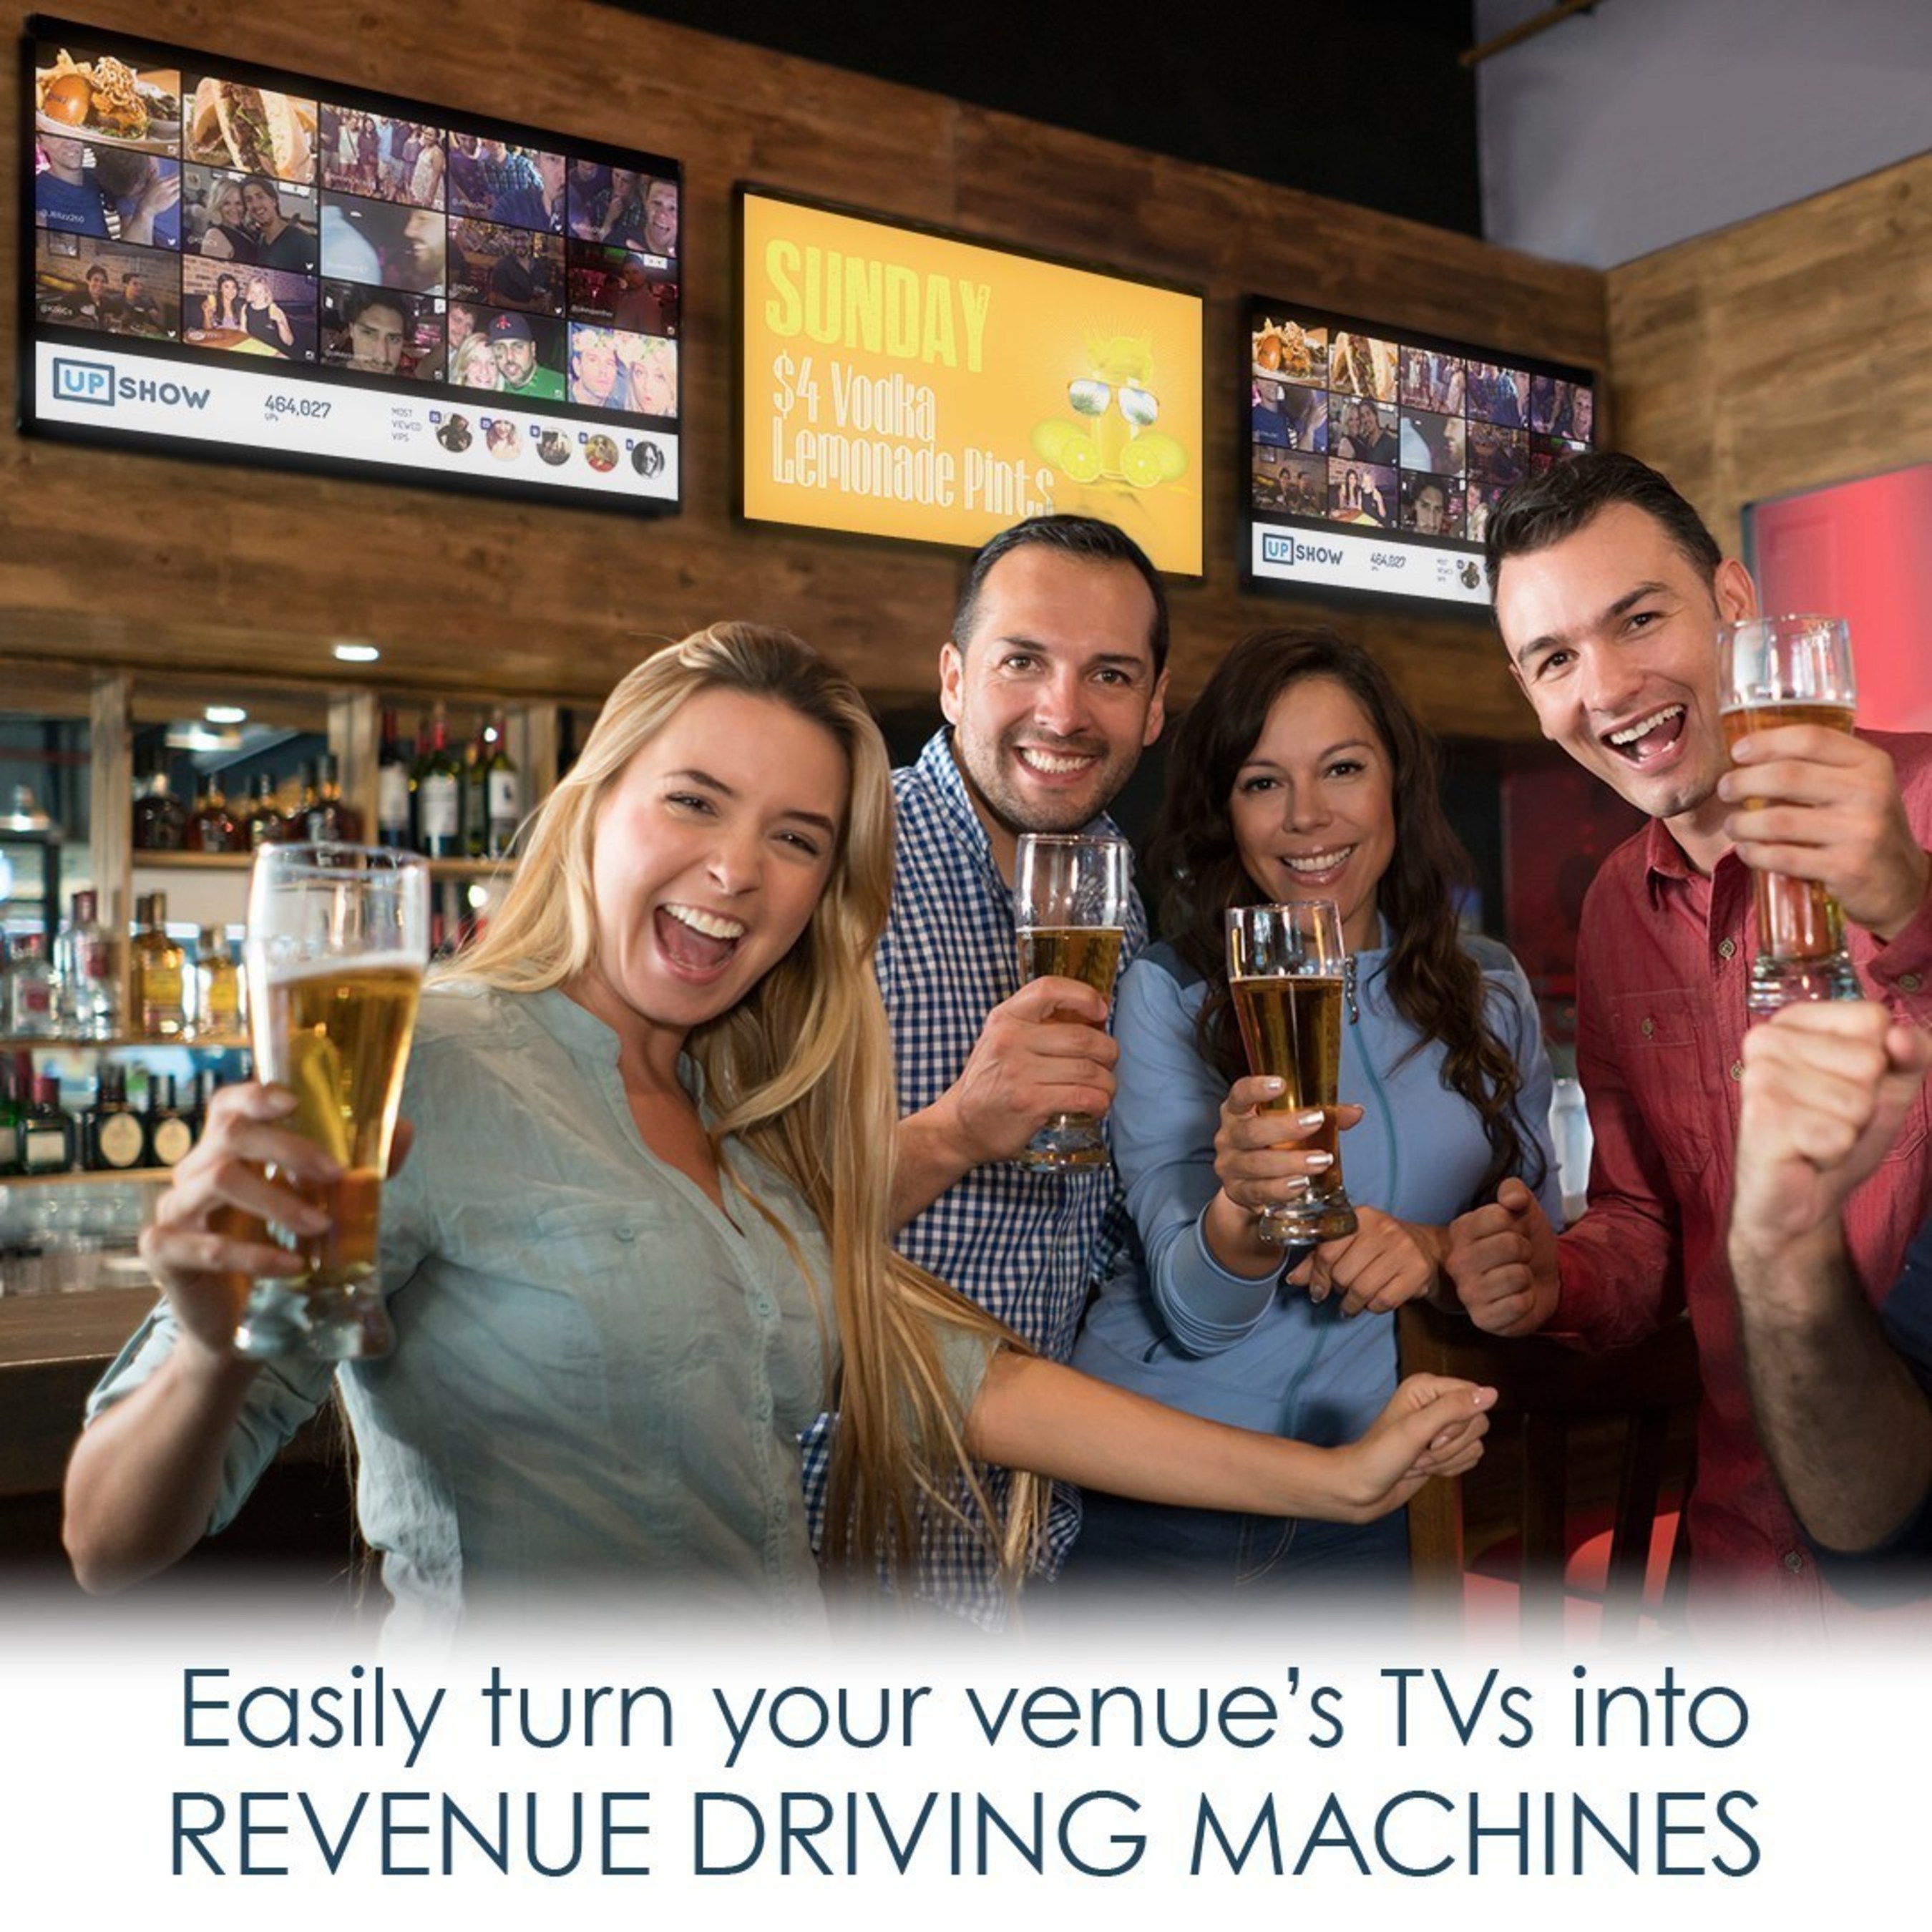 UPshow's Promo & Social Displays drive marketing programs through a business's televisions.